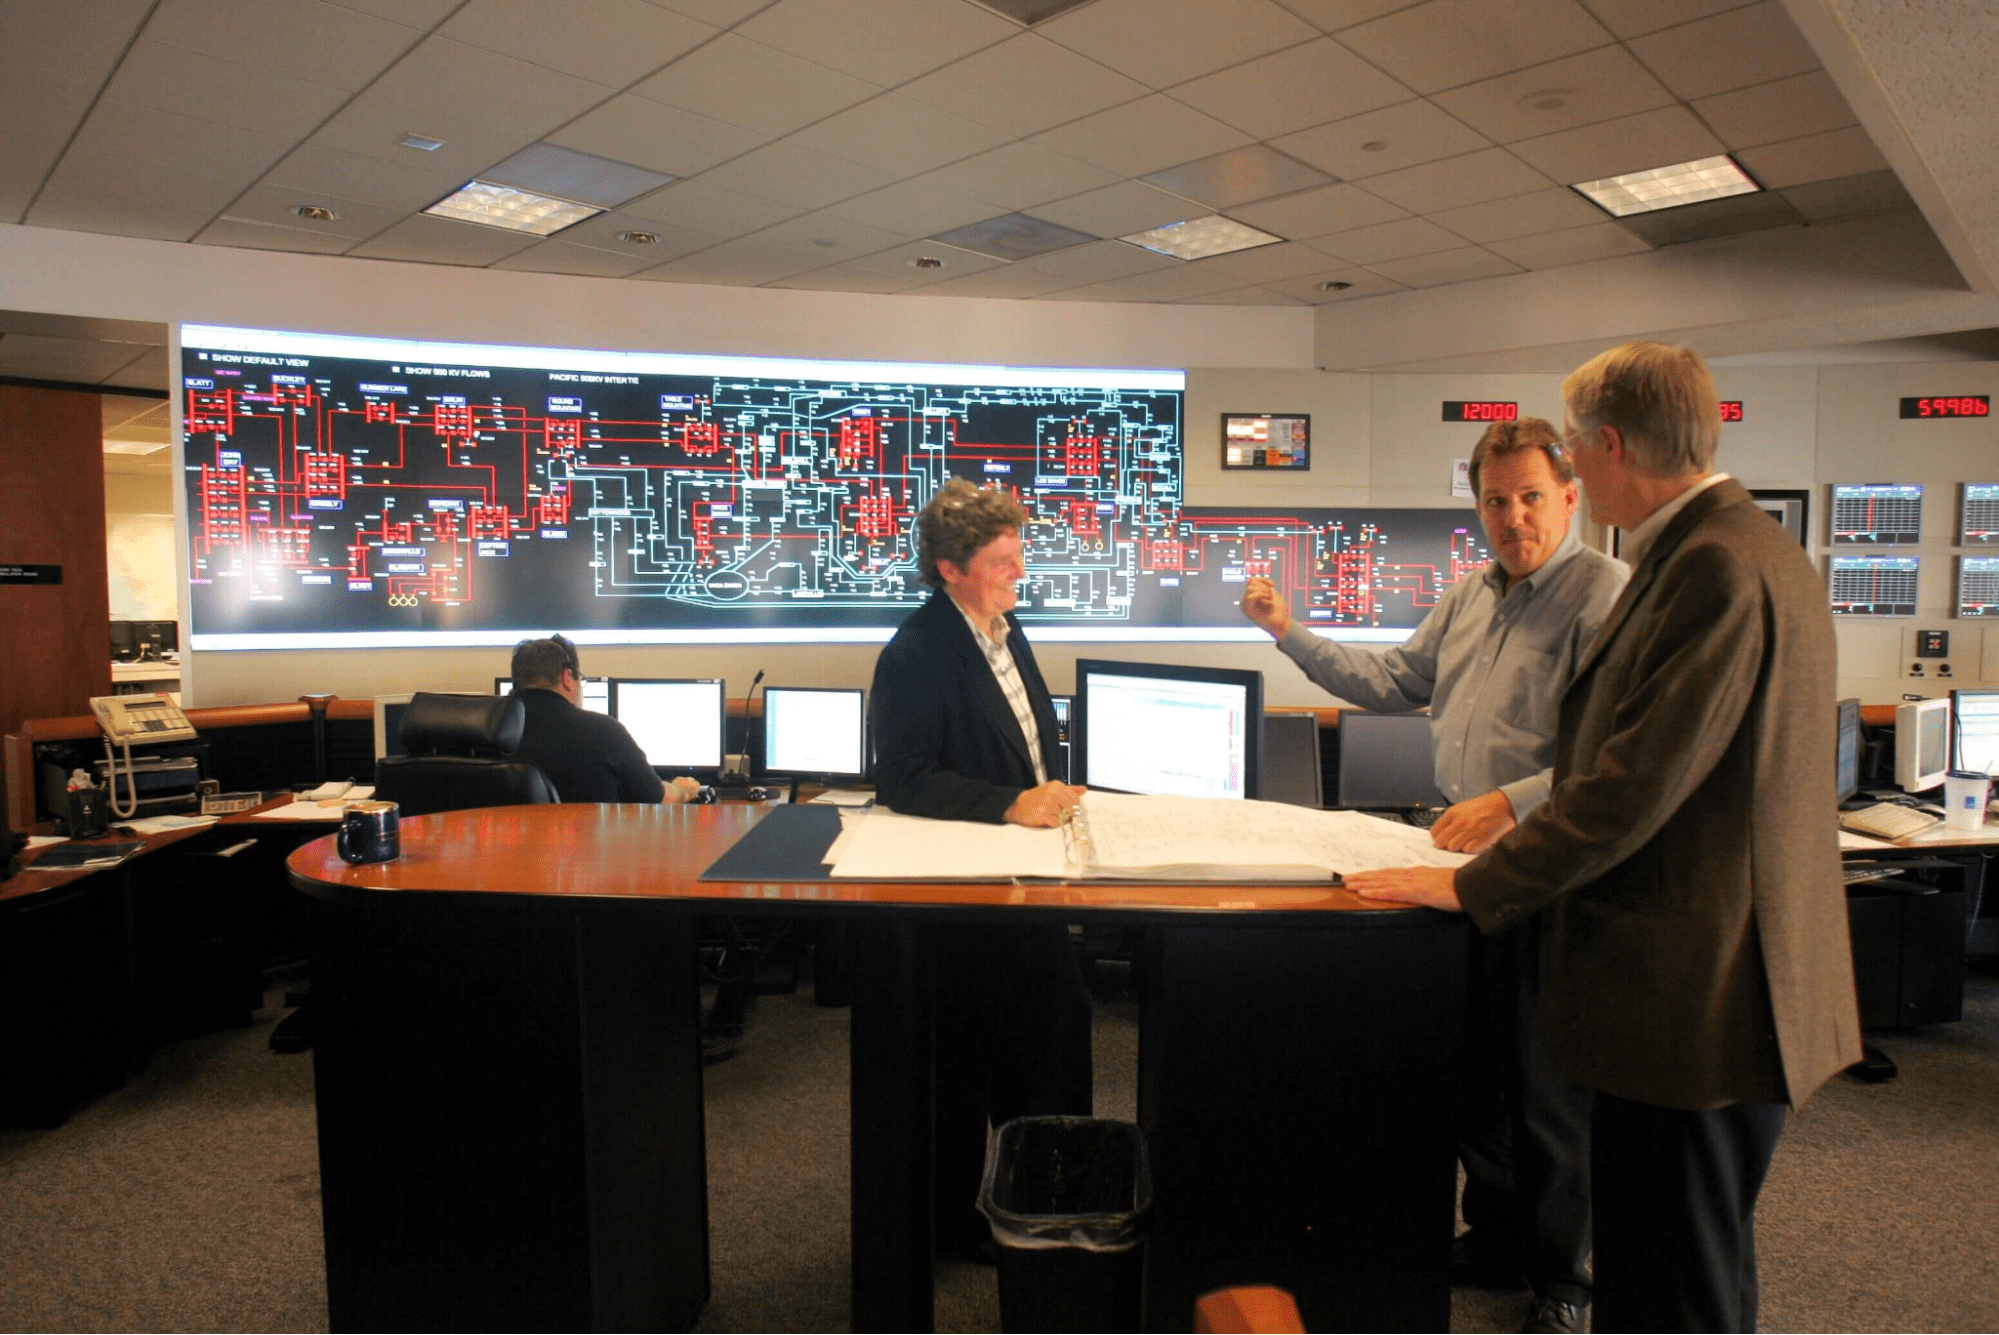 3 people working together in a control room